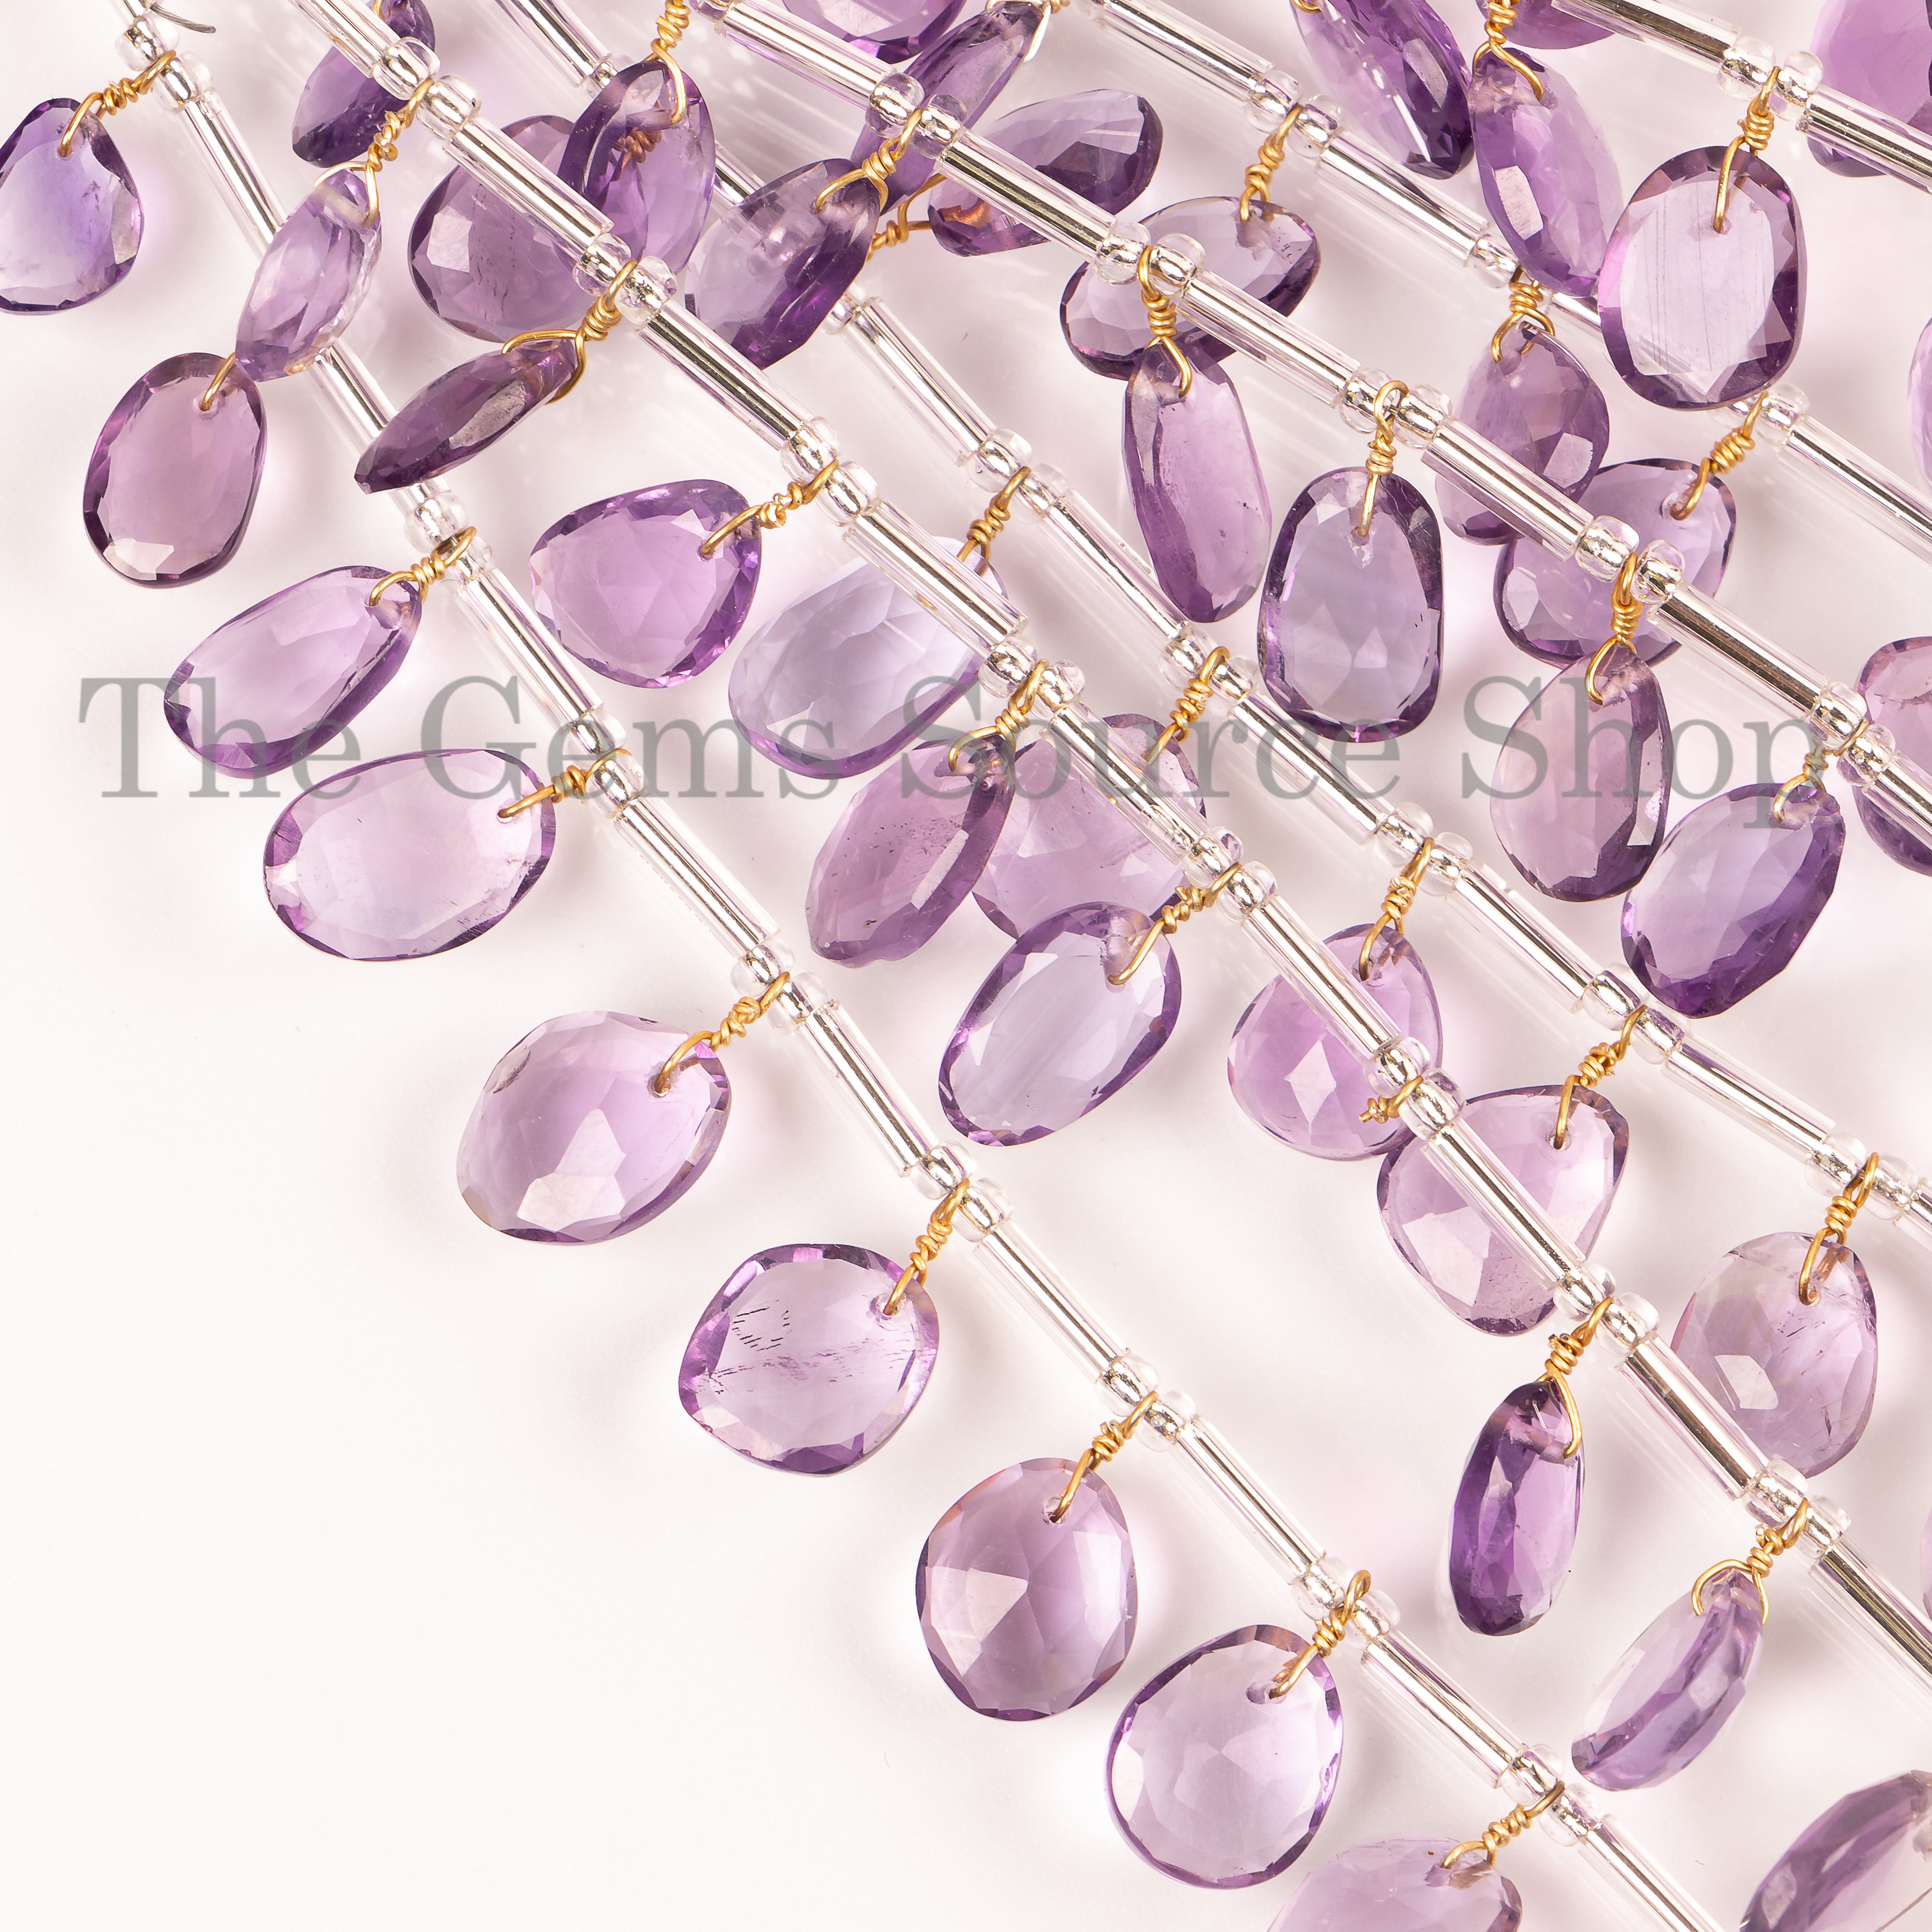 Amethyst Rose Cut Beads, Amethyst Gemstone Briolette, Flat Fancy Beads, Front to Back Drill Beads, Rosecut Beads, Face Drill Beads